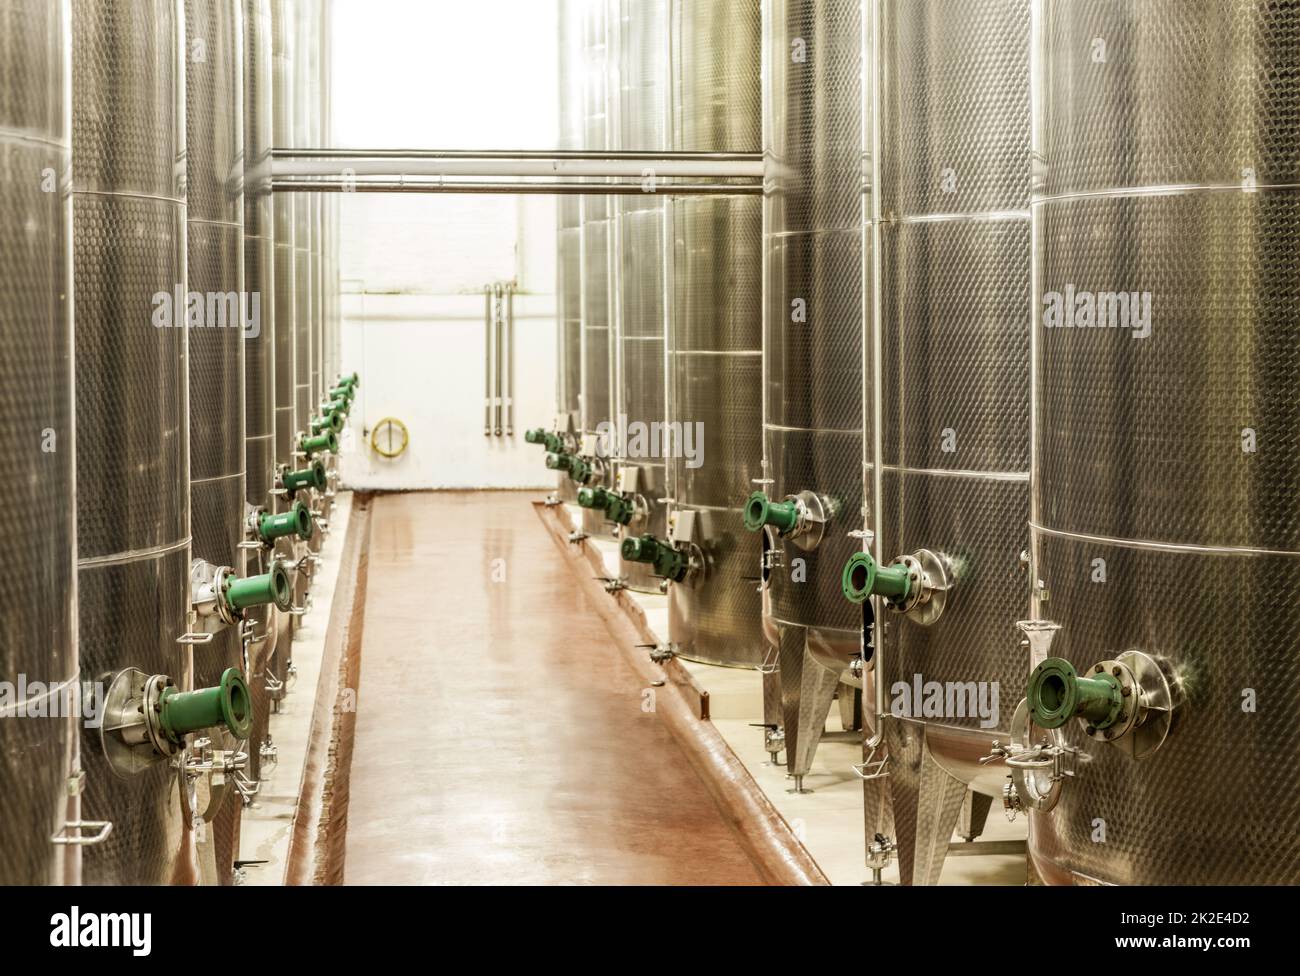 Producing wine on a large scale. Shot of the fermentation vessels inside a winemaking factory. Stock Photo